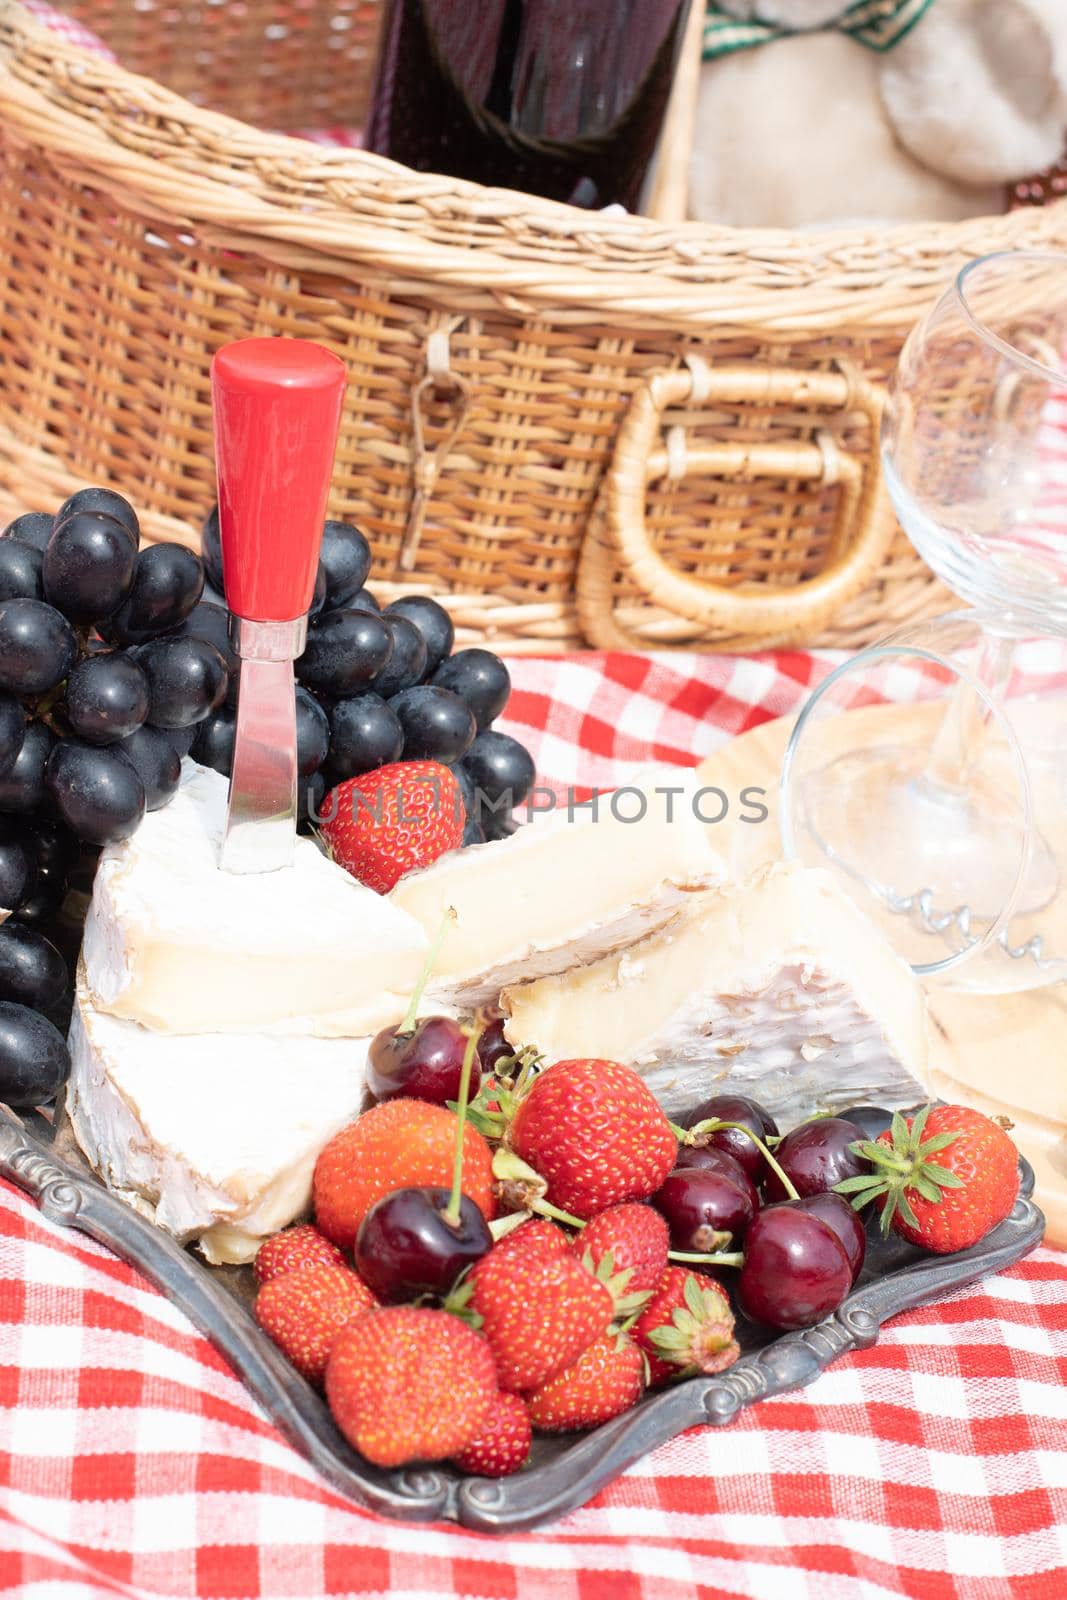 summer picnic on a green lawn with red wine, cheese and fresh berries, grapes by KaterinaDalemans